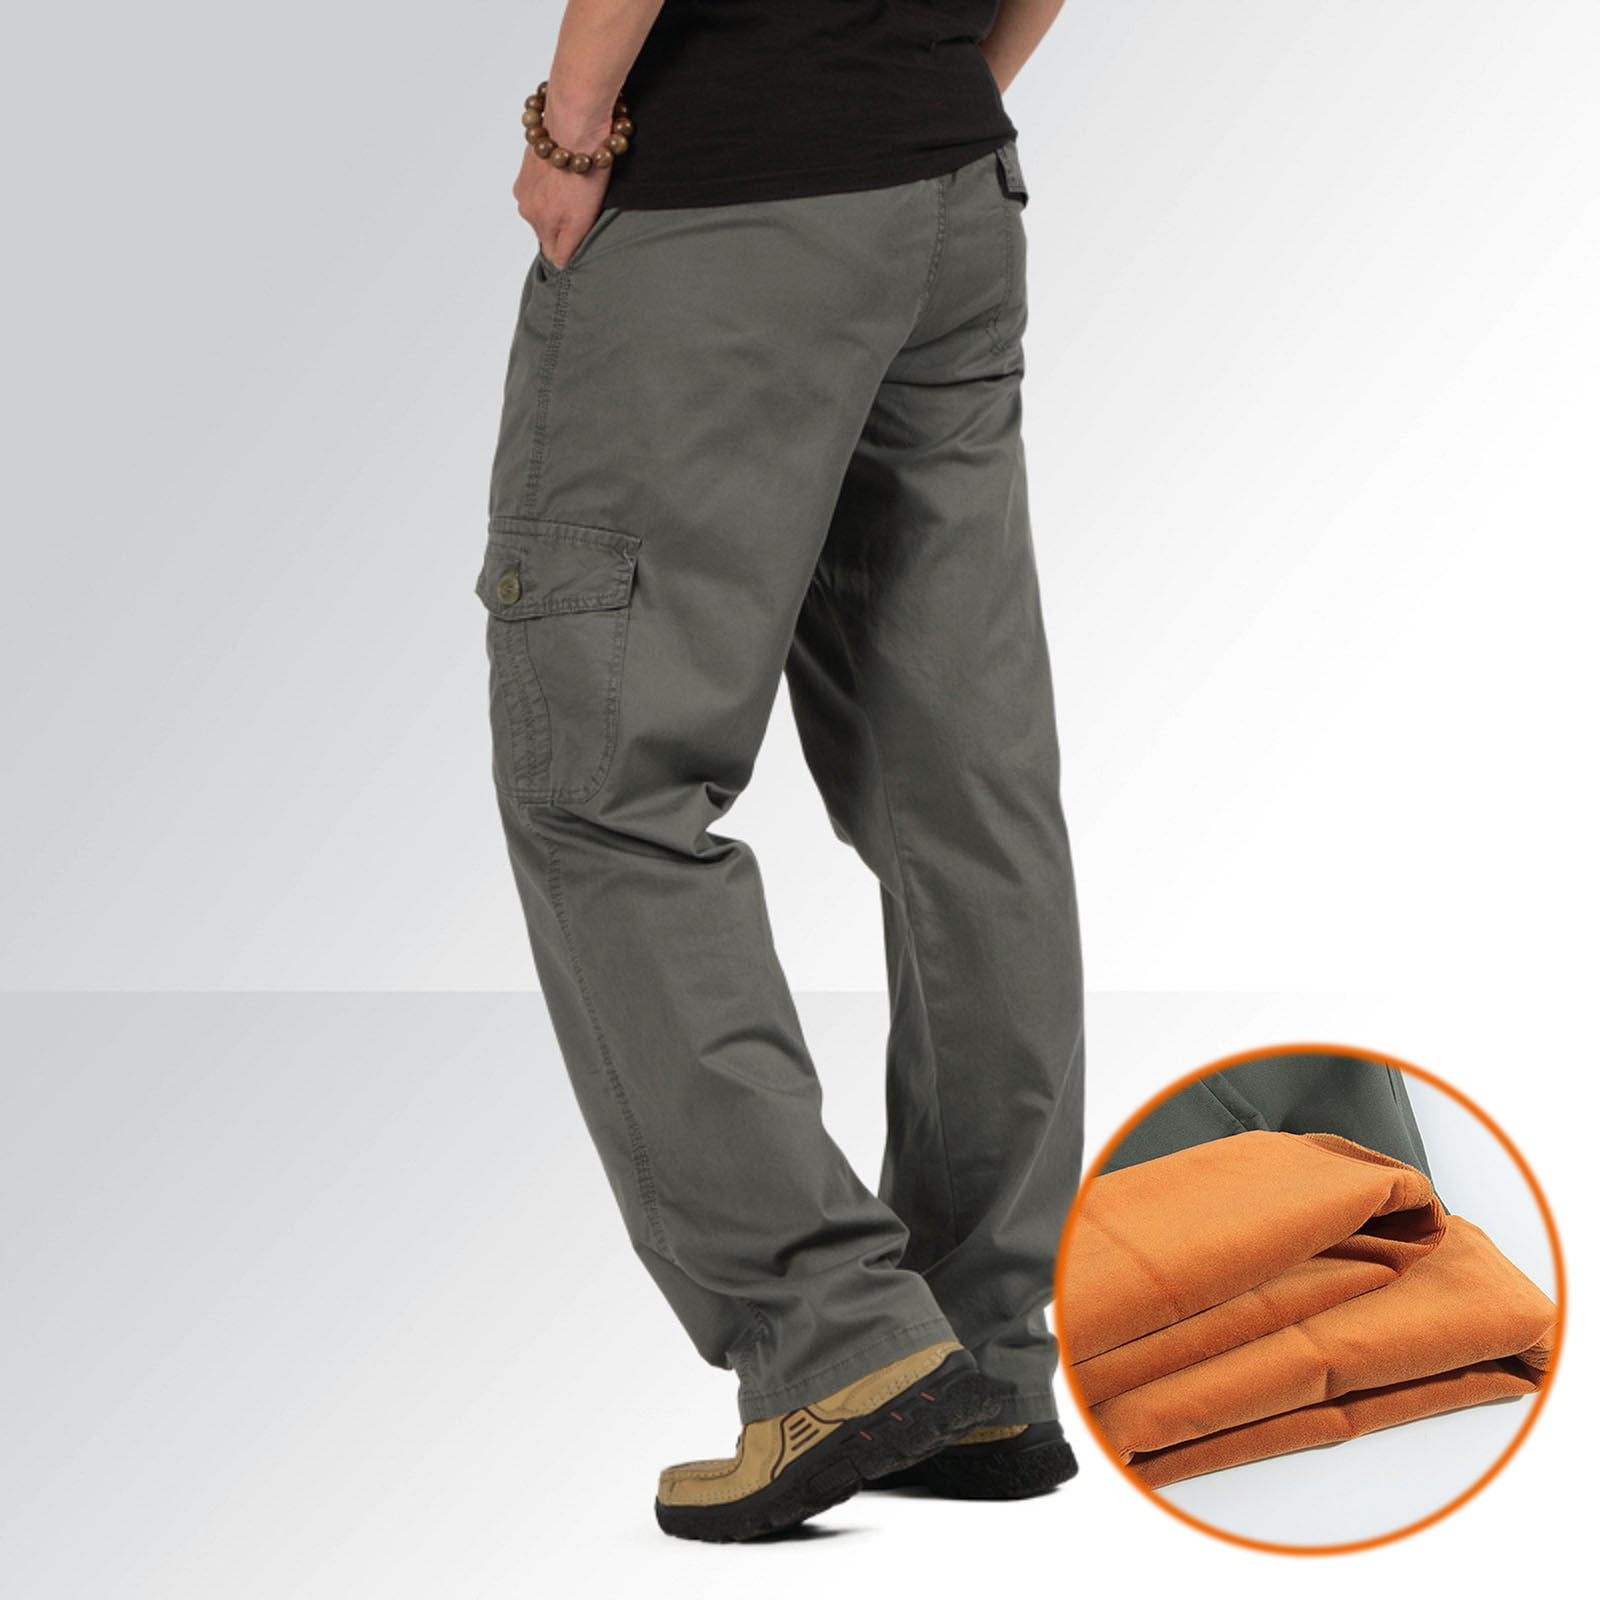 HRSR Men's Cargo Sweatpants with Pockets Casual Loose Trousers for